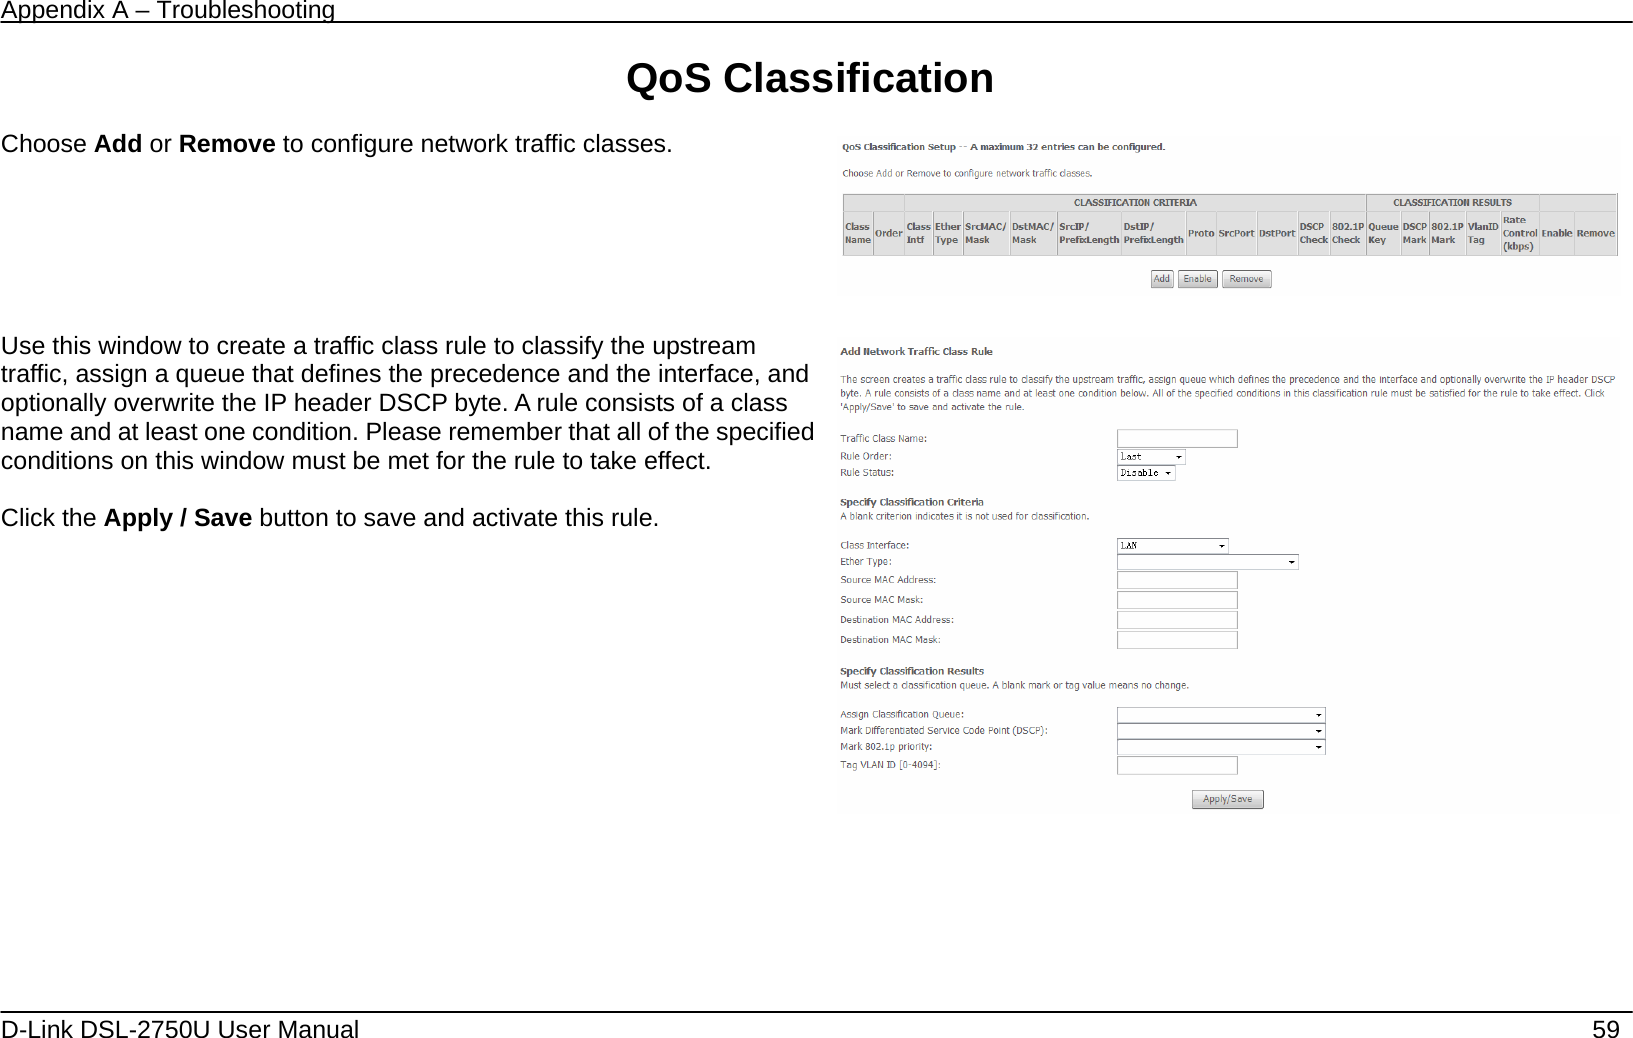 Appendix A – Troubleshooting   D-Link DSL-2750U User Manual    59 QoS Classification  Choose Add or Remove to configure network traffic classes.       Use this window to create a traffic class rule to classify the upstream traffic, assign a queue that defines the precedence and the interface, and optionally overwrite the IP header DSCP byte. A rule consists of a class name and at least one condition. Please remember that all of the specified conditions on this window must be met for the rule to take effect.  Click the Apply / Save button to save and activate this rule.       